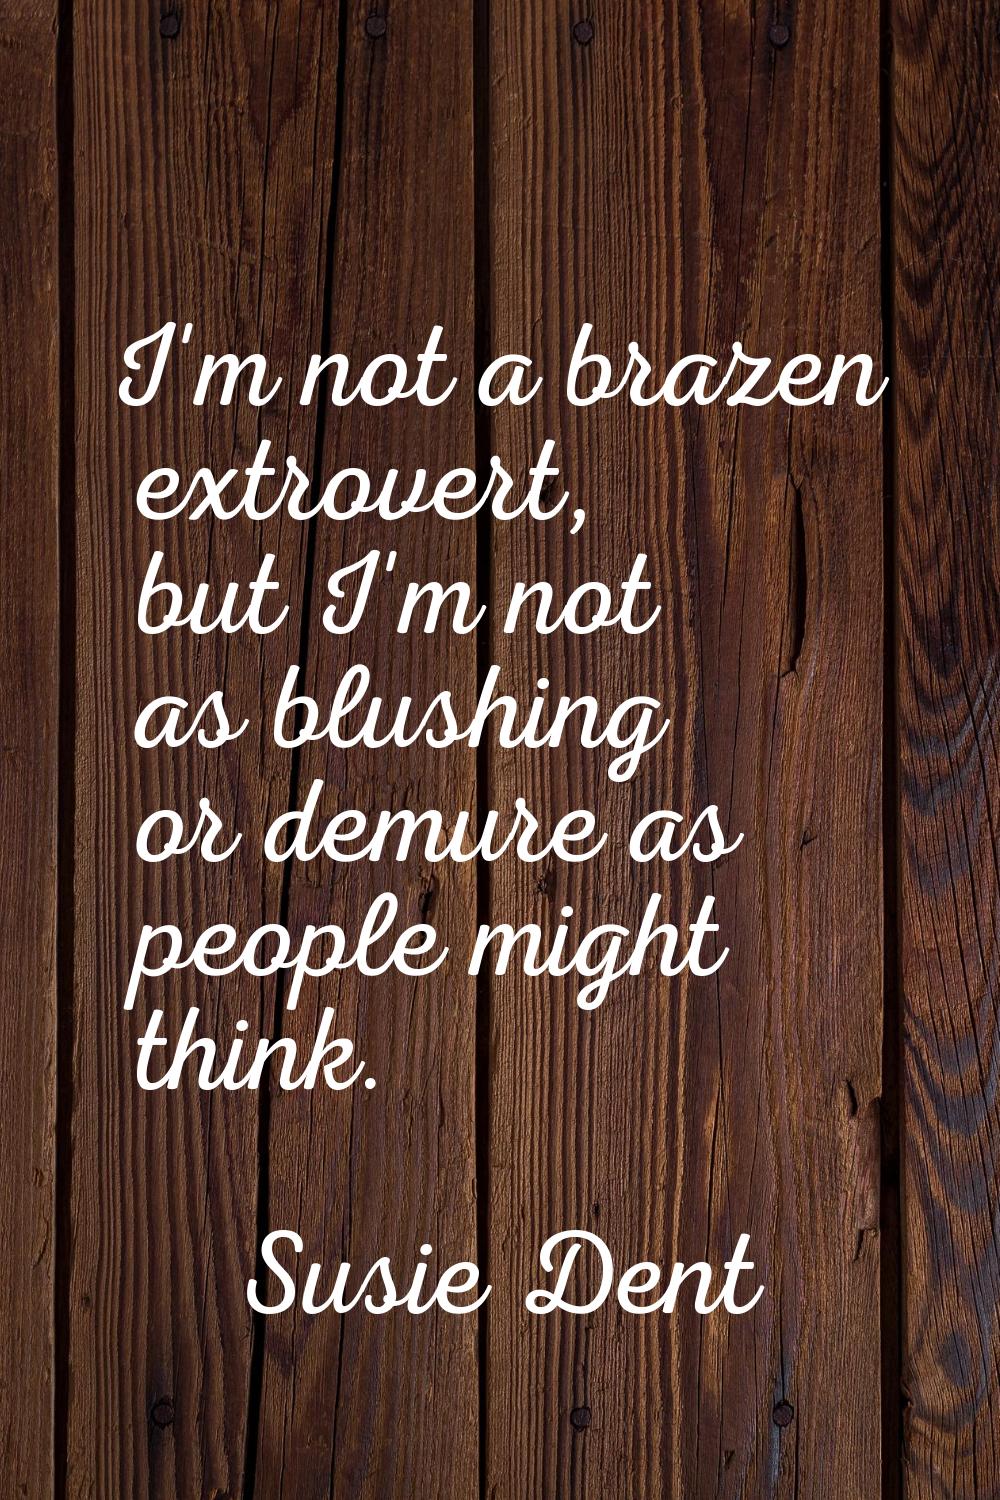 I'm not a brazen extrovert, but I'm not as blushing or demure as people might think.